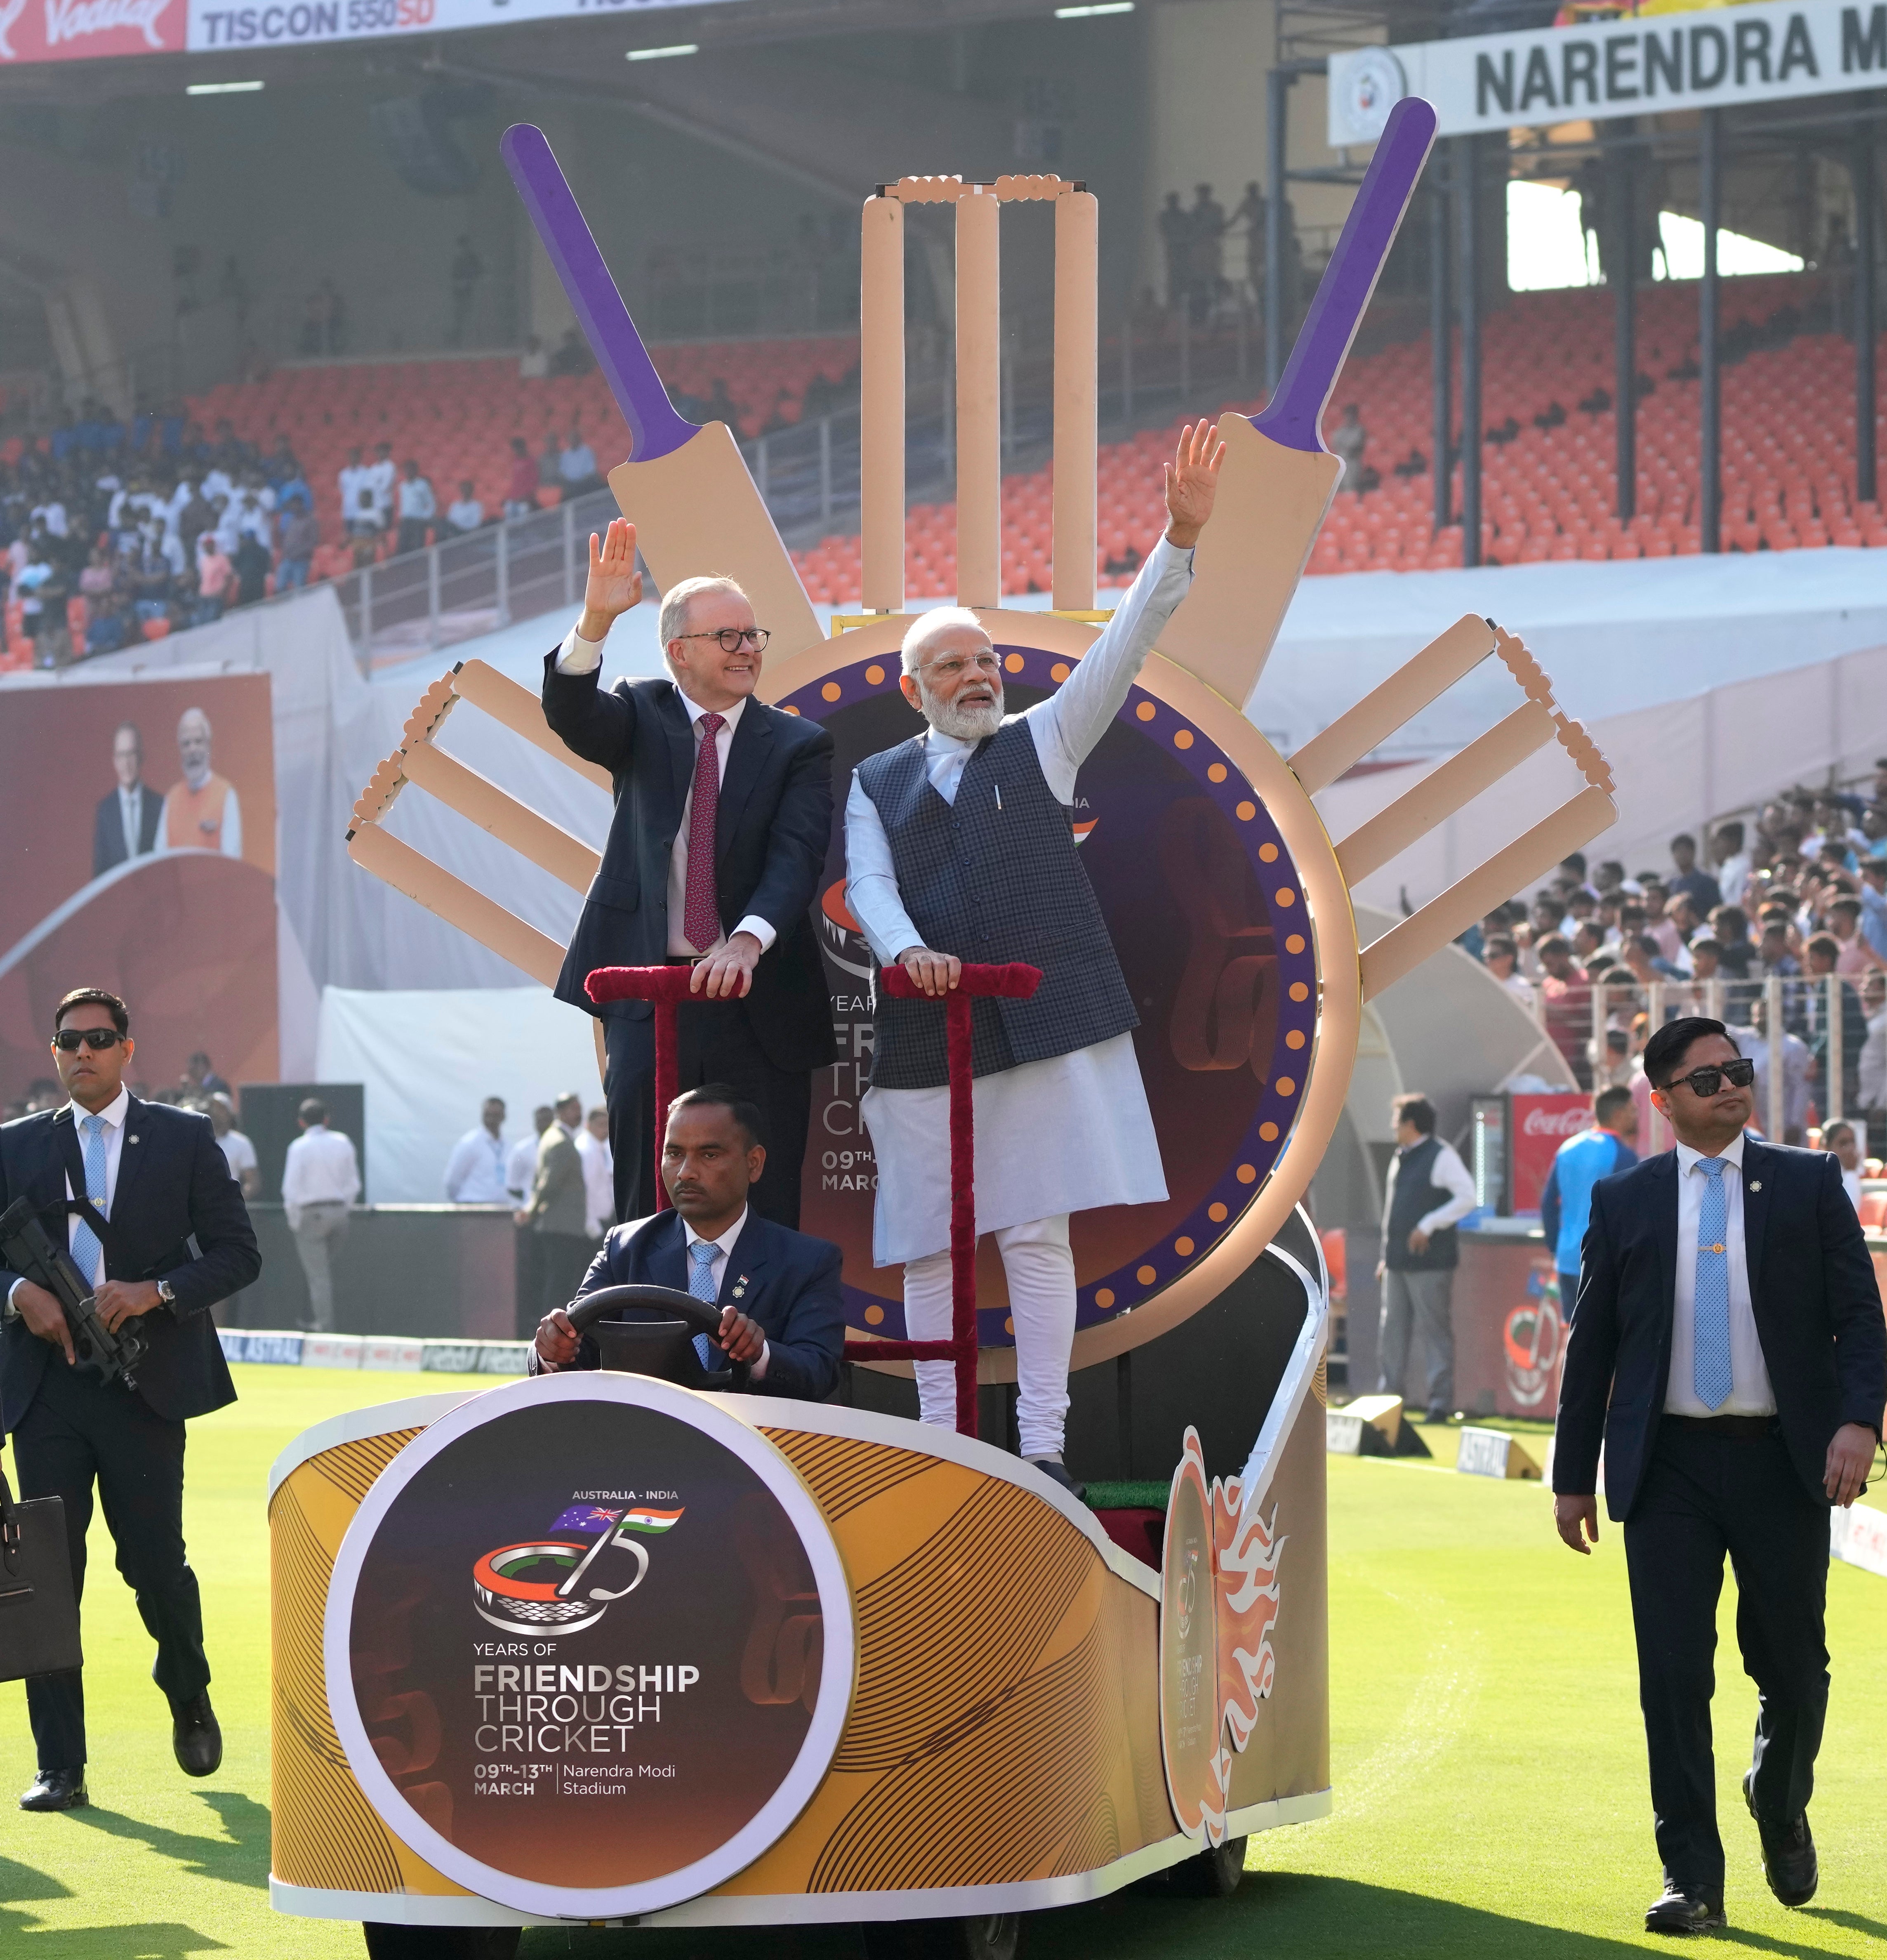 Modi with his Australian counterpart Anthony Albanese wave as they arrive in the stadium to watch fourth cricket test match between India and Australia